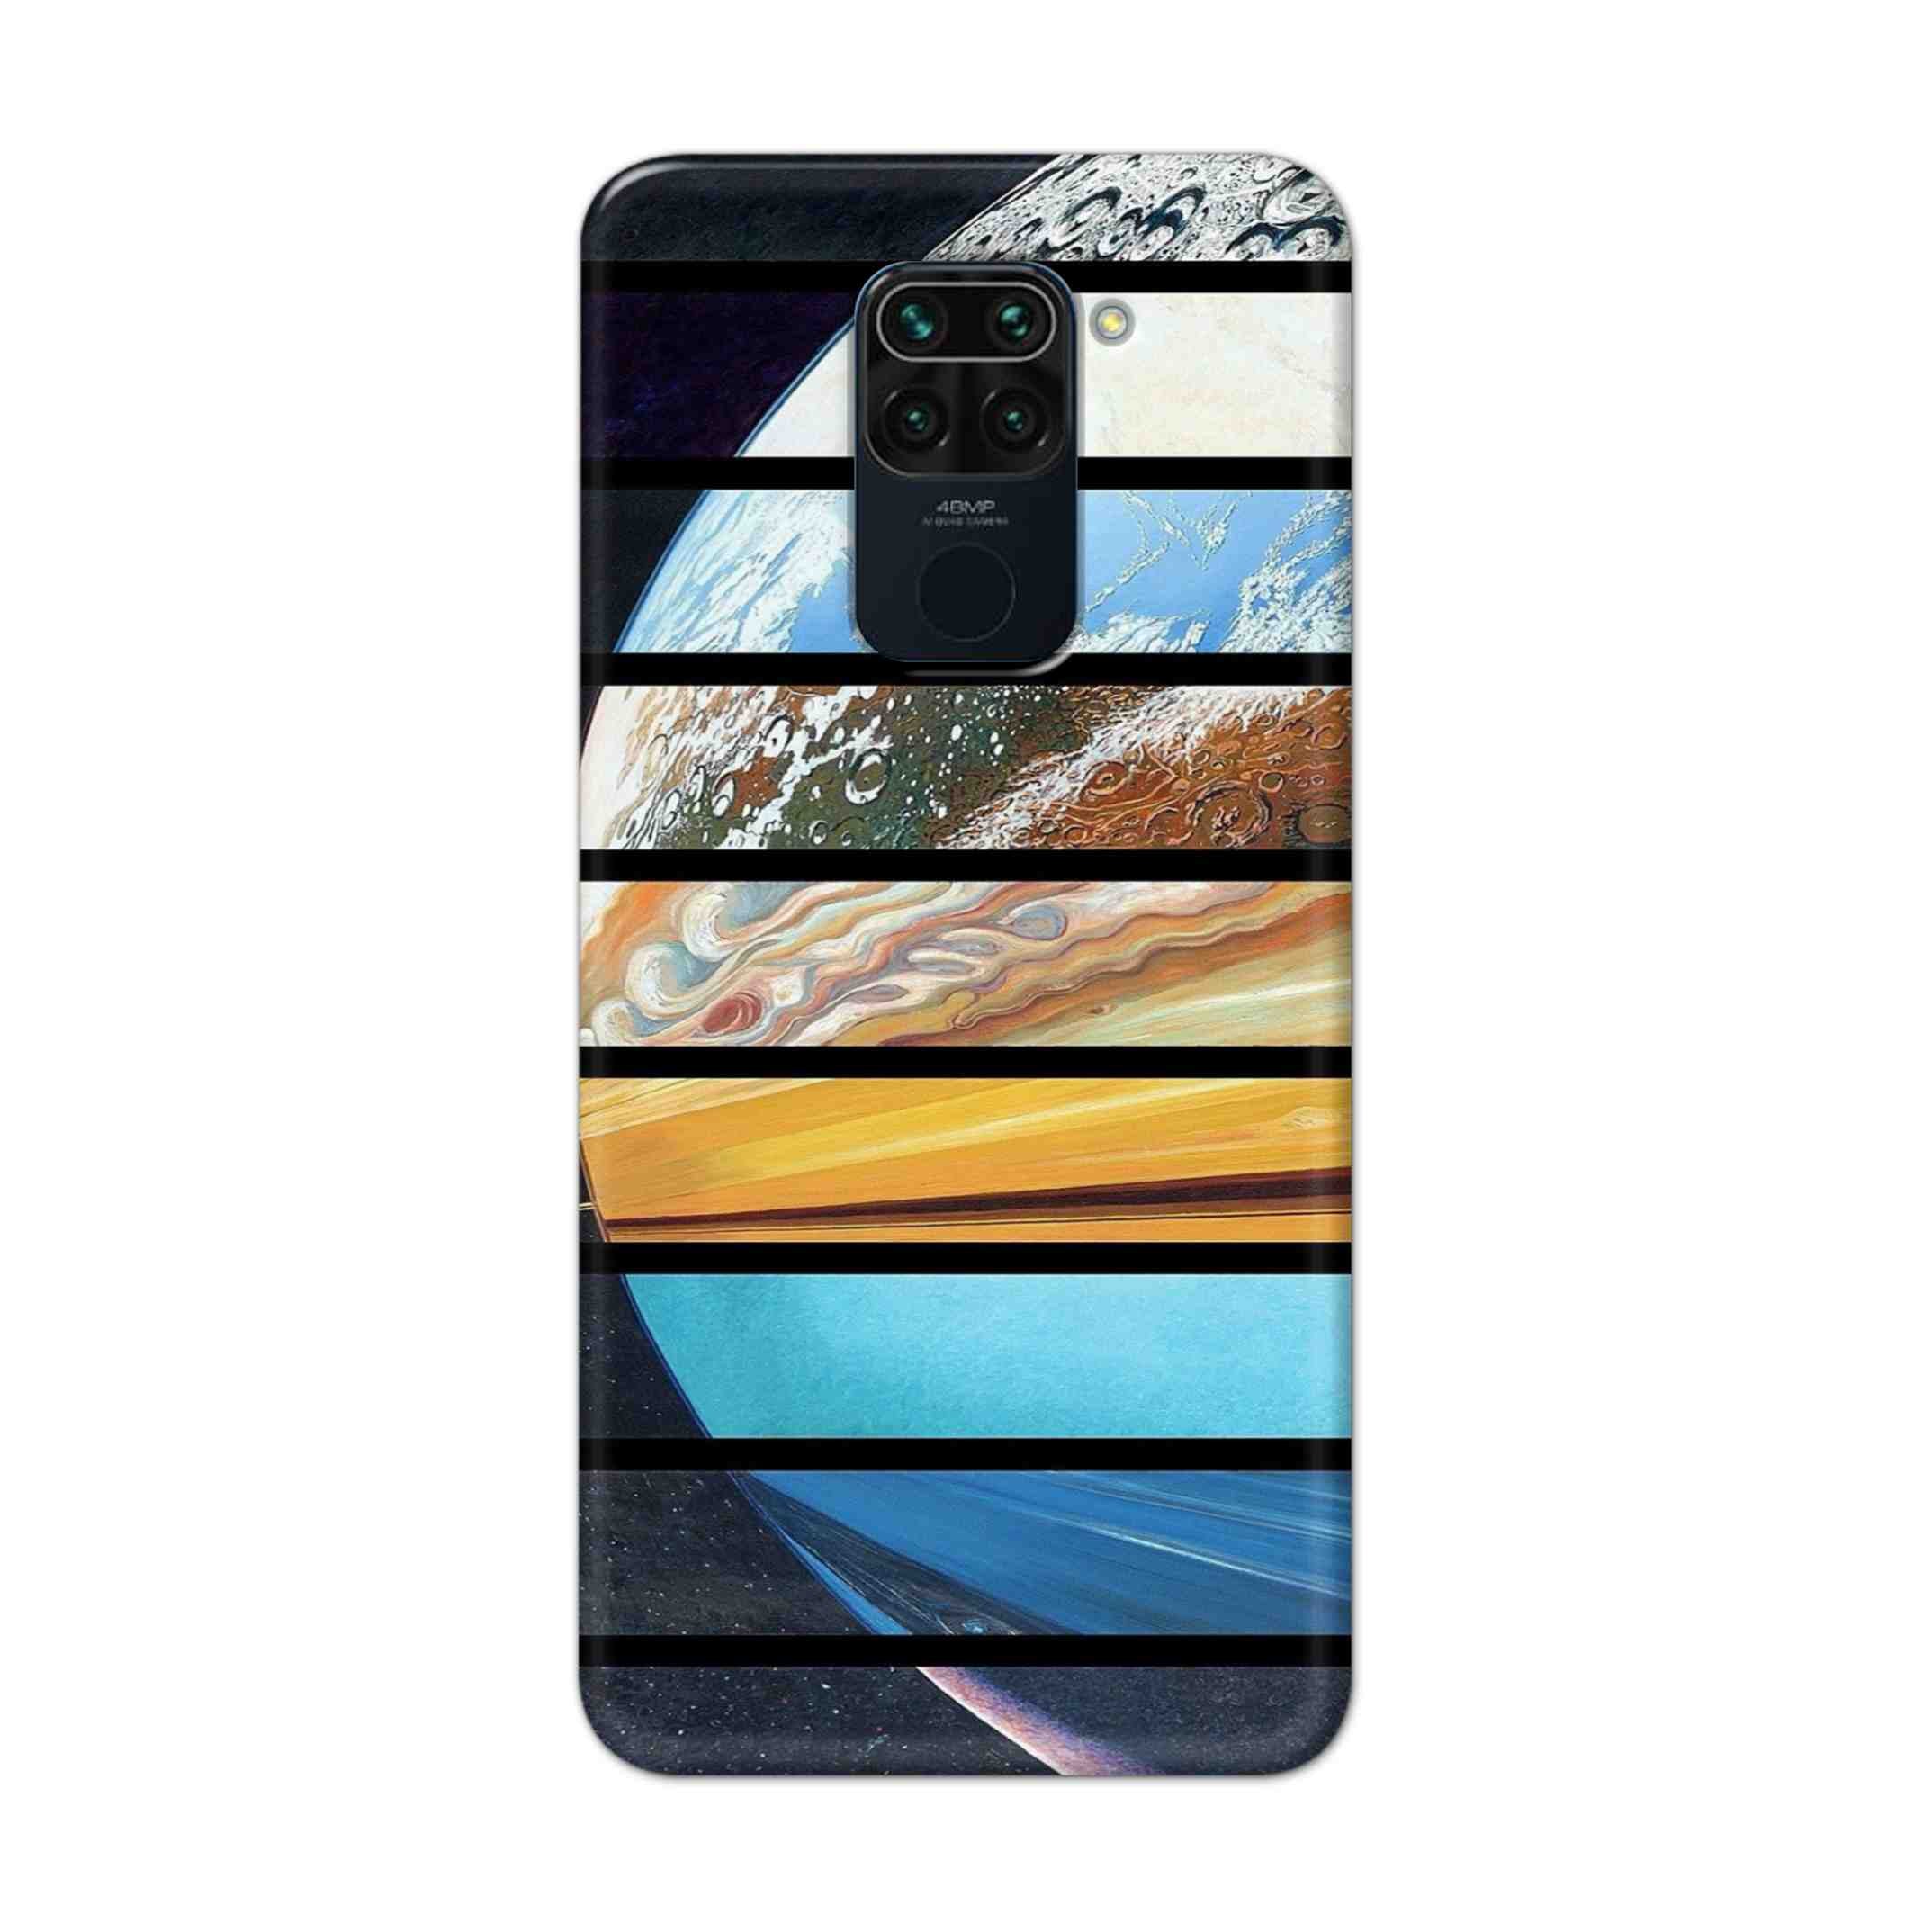 Buy Colourful Earth Hard Back Mobile Phone Case Cover For Xiaomi Redmi Note 9 Online